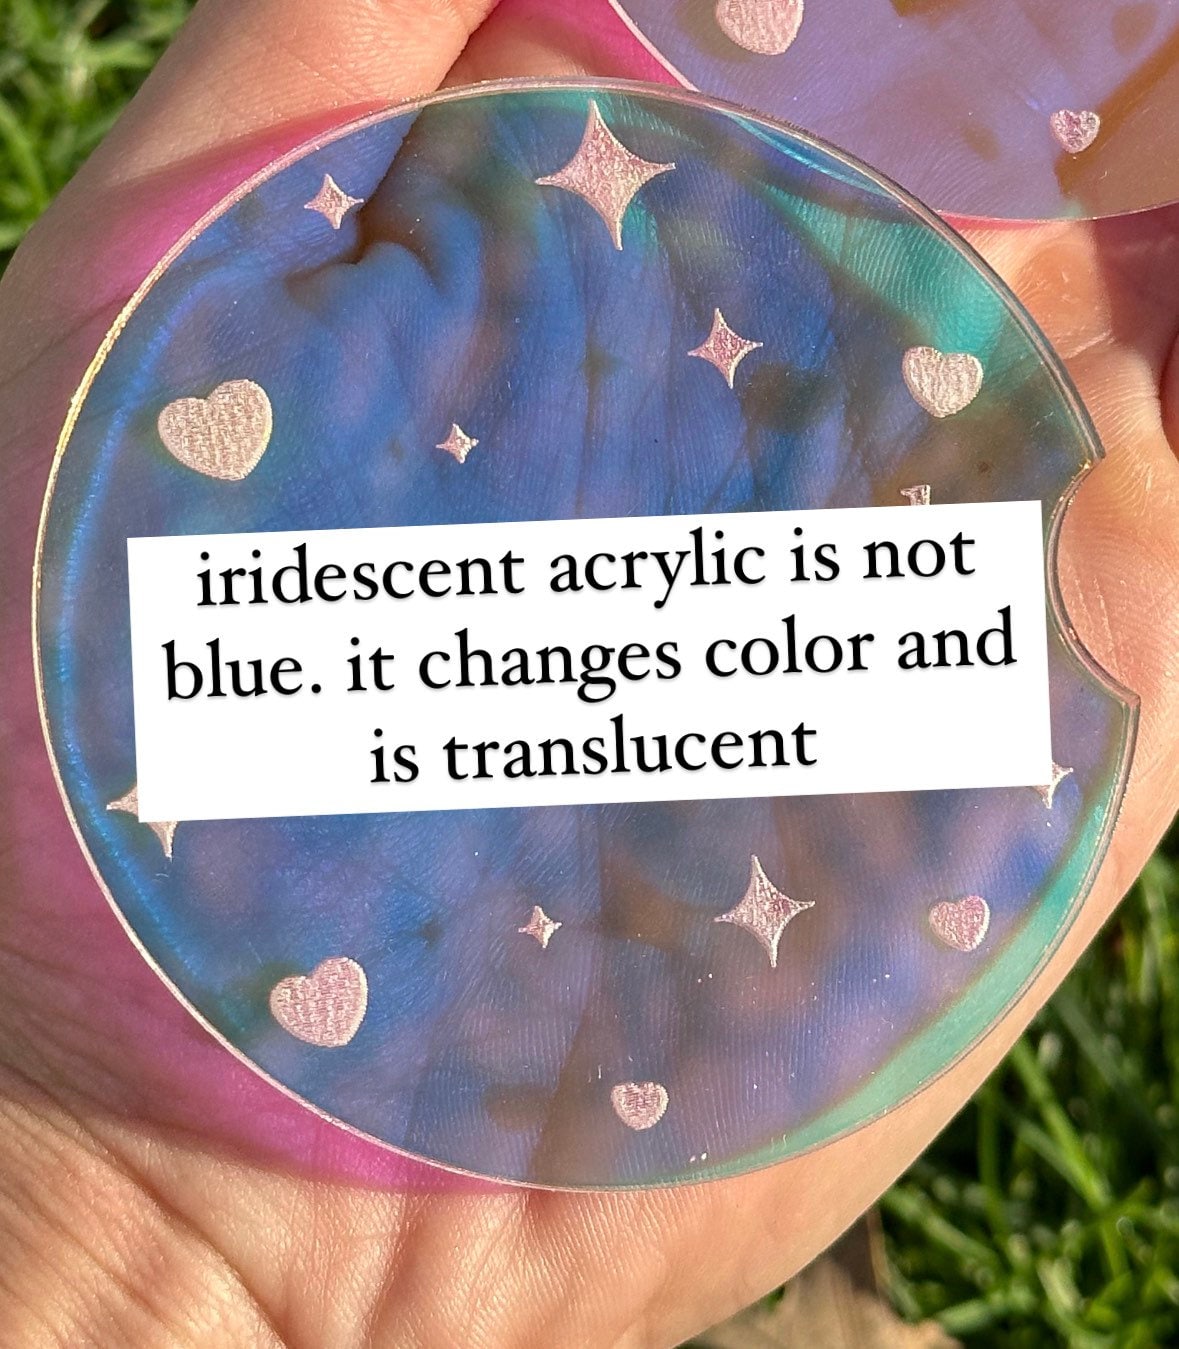 Iridescent Therapy is Not Enough I Need To Bite People Heart Hoop Earrings